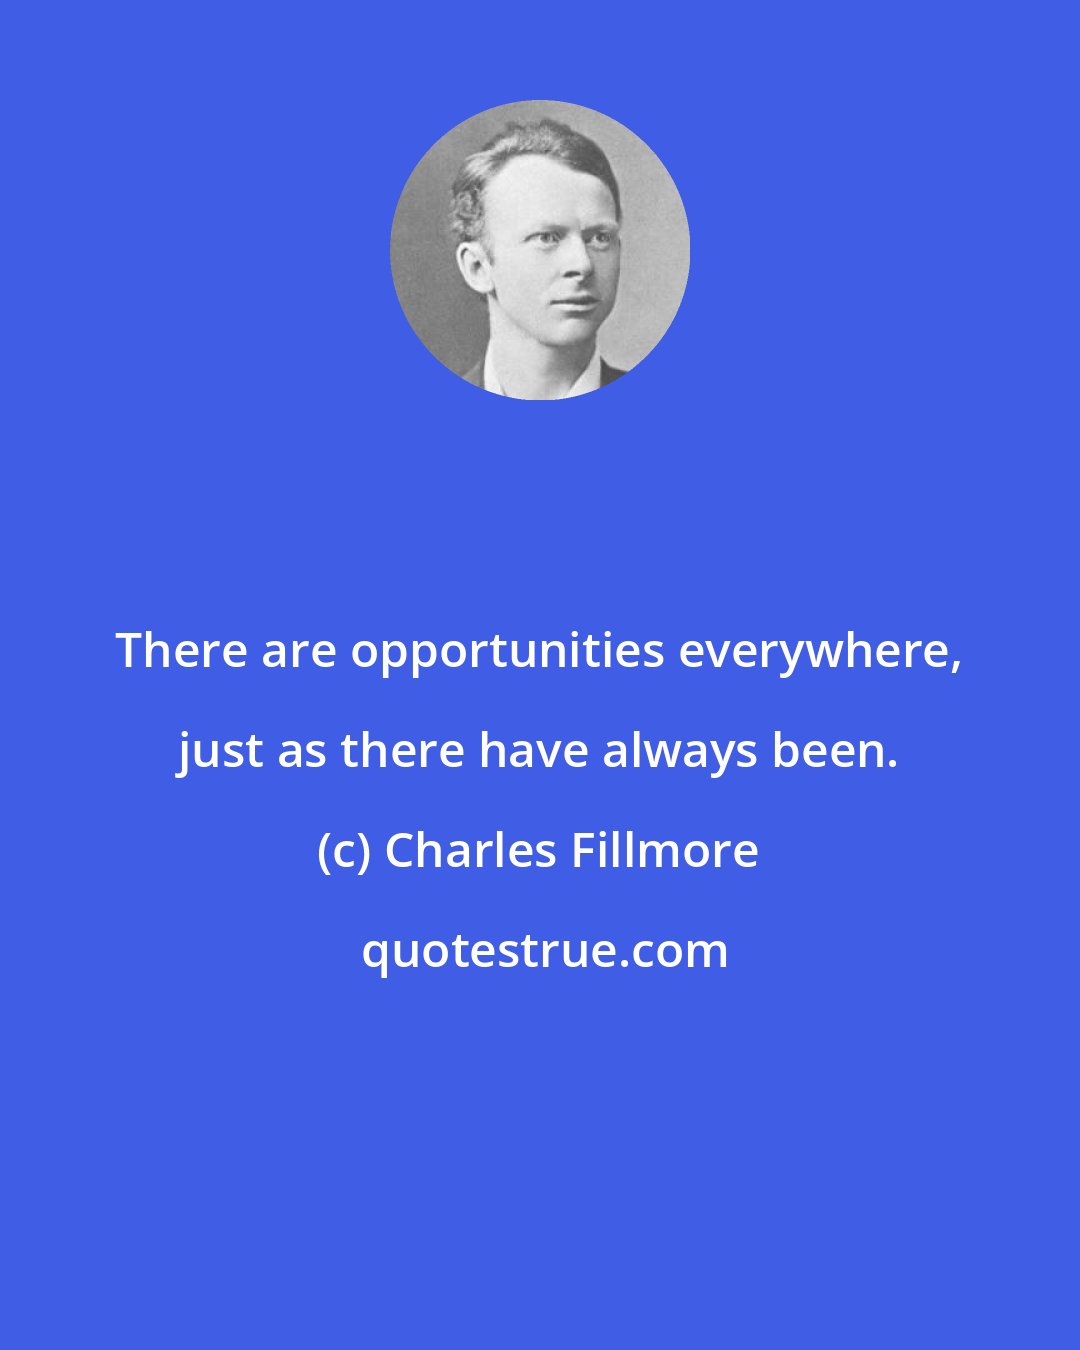 Charles Fillmore: There are opportunities everywhere, just as there have always been.